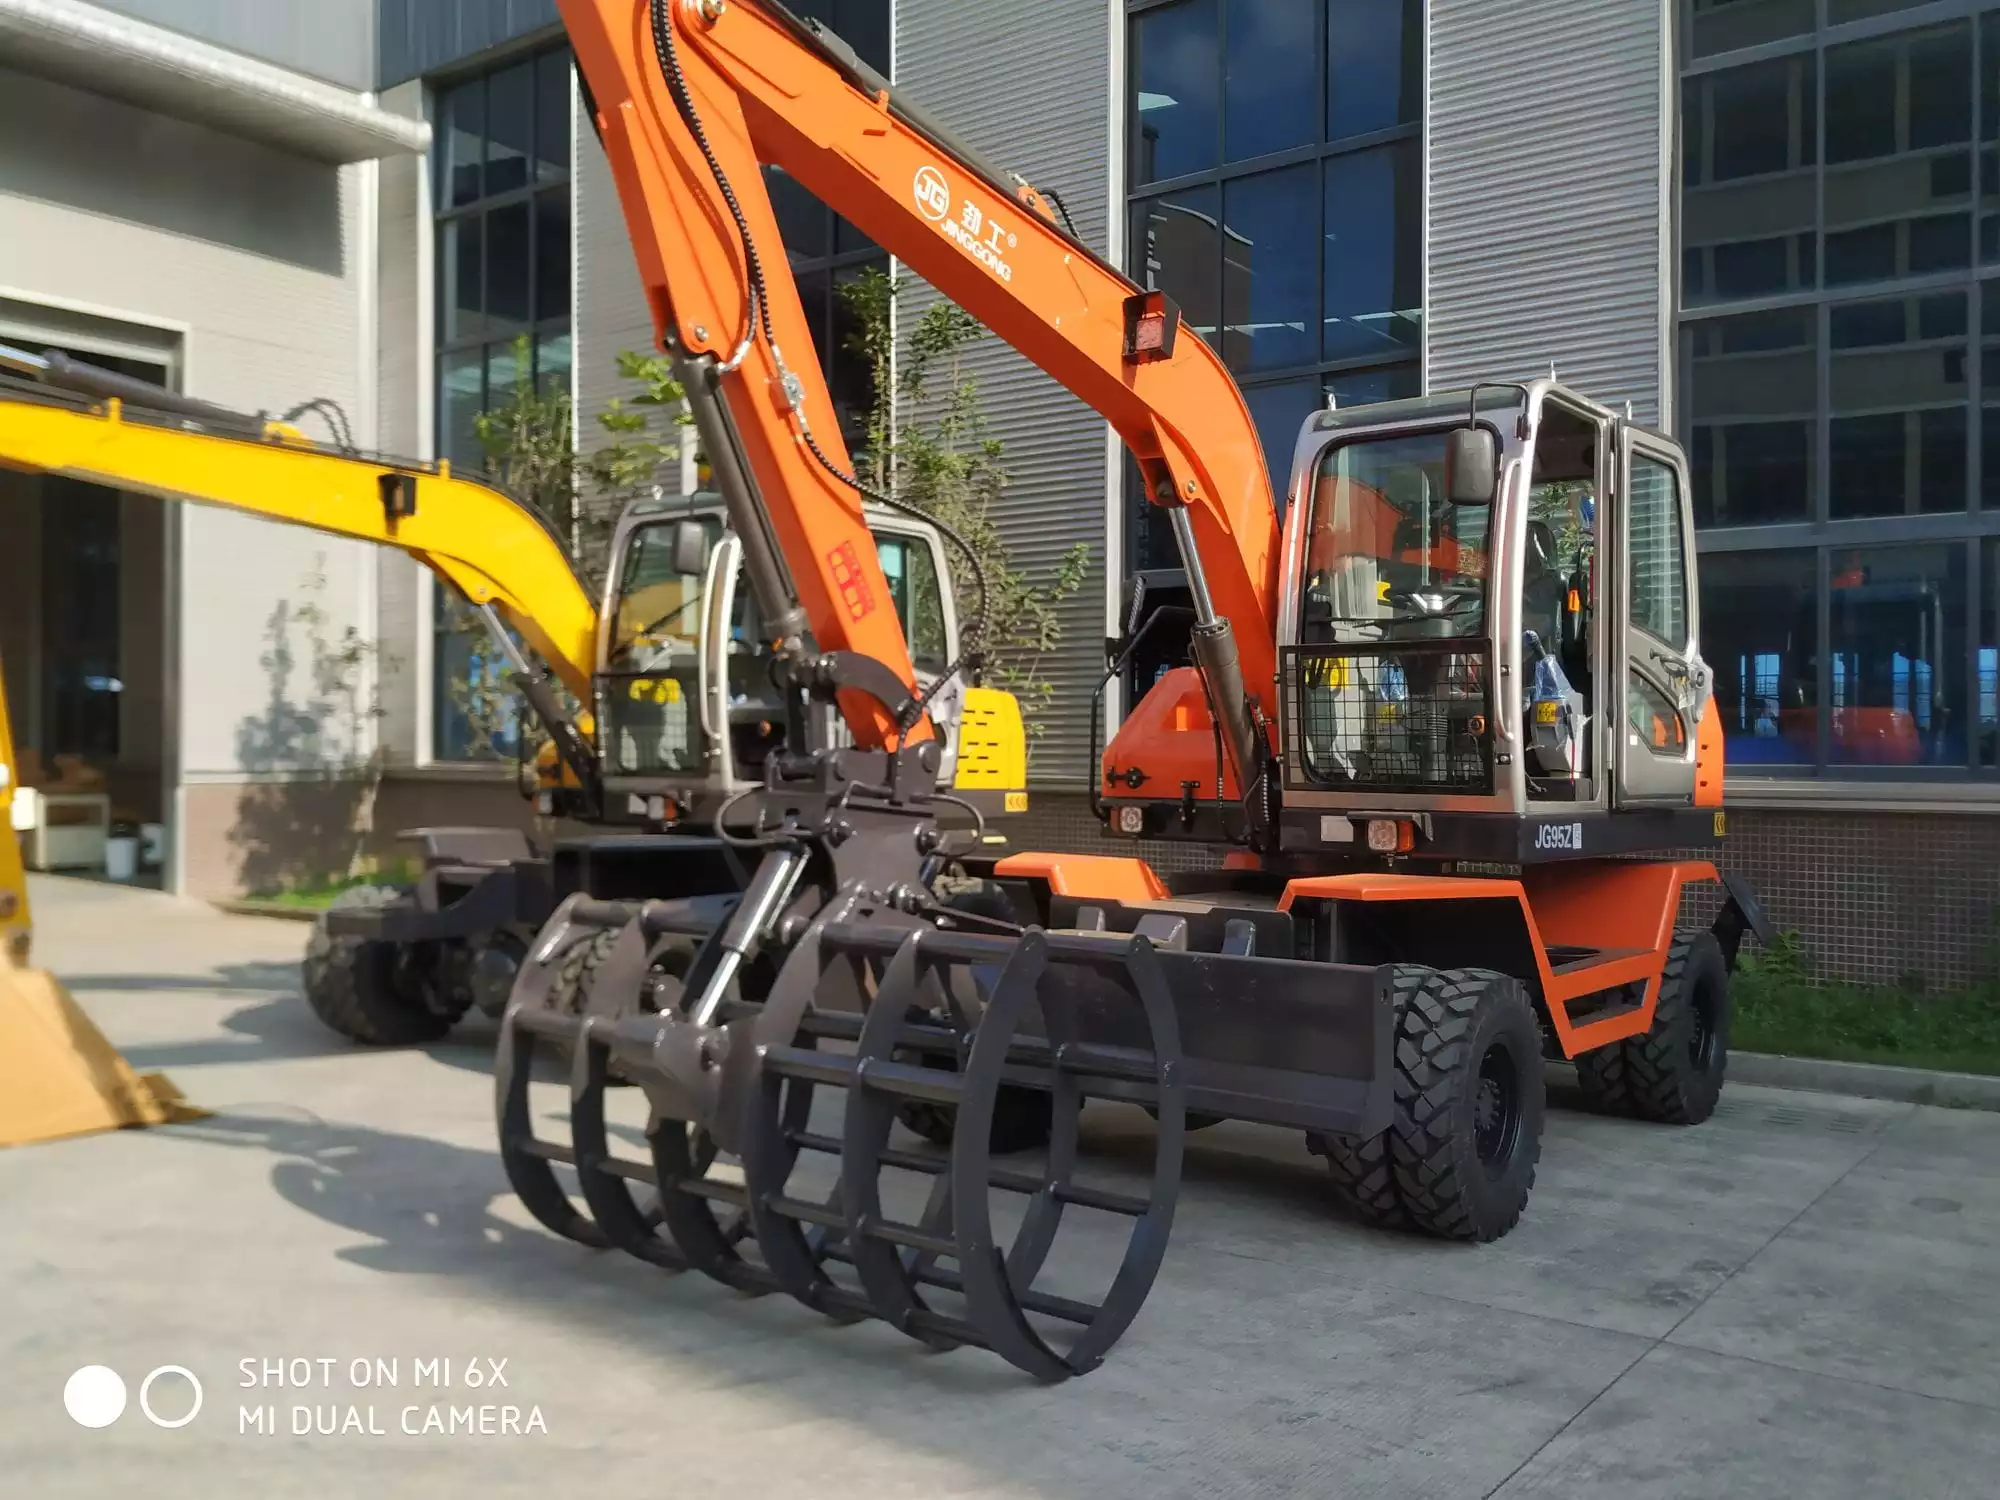 Wheeled Grab Digger Excavators with Bulldozer and Outstriger